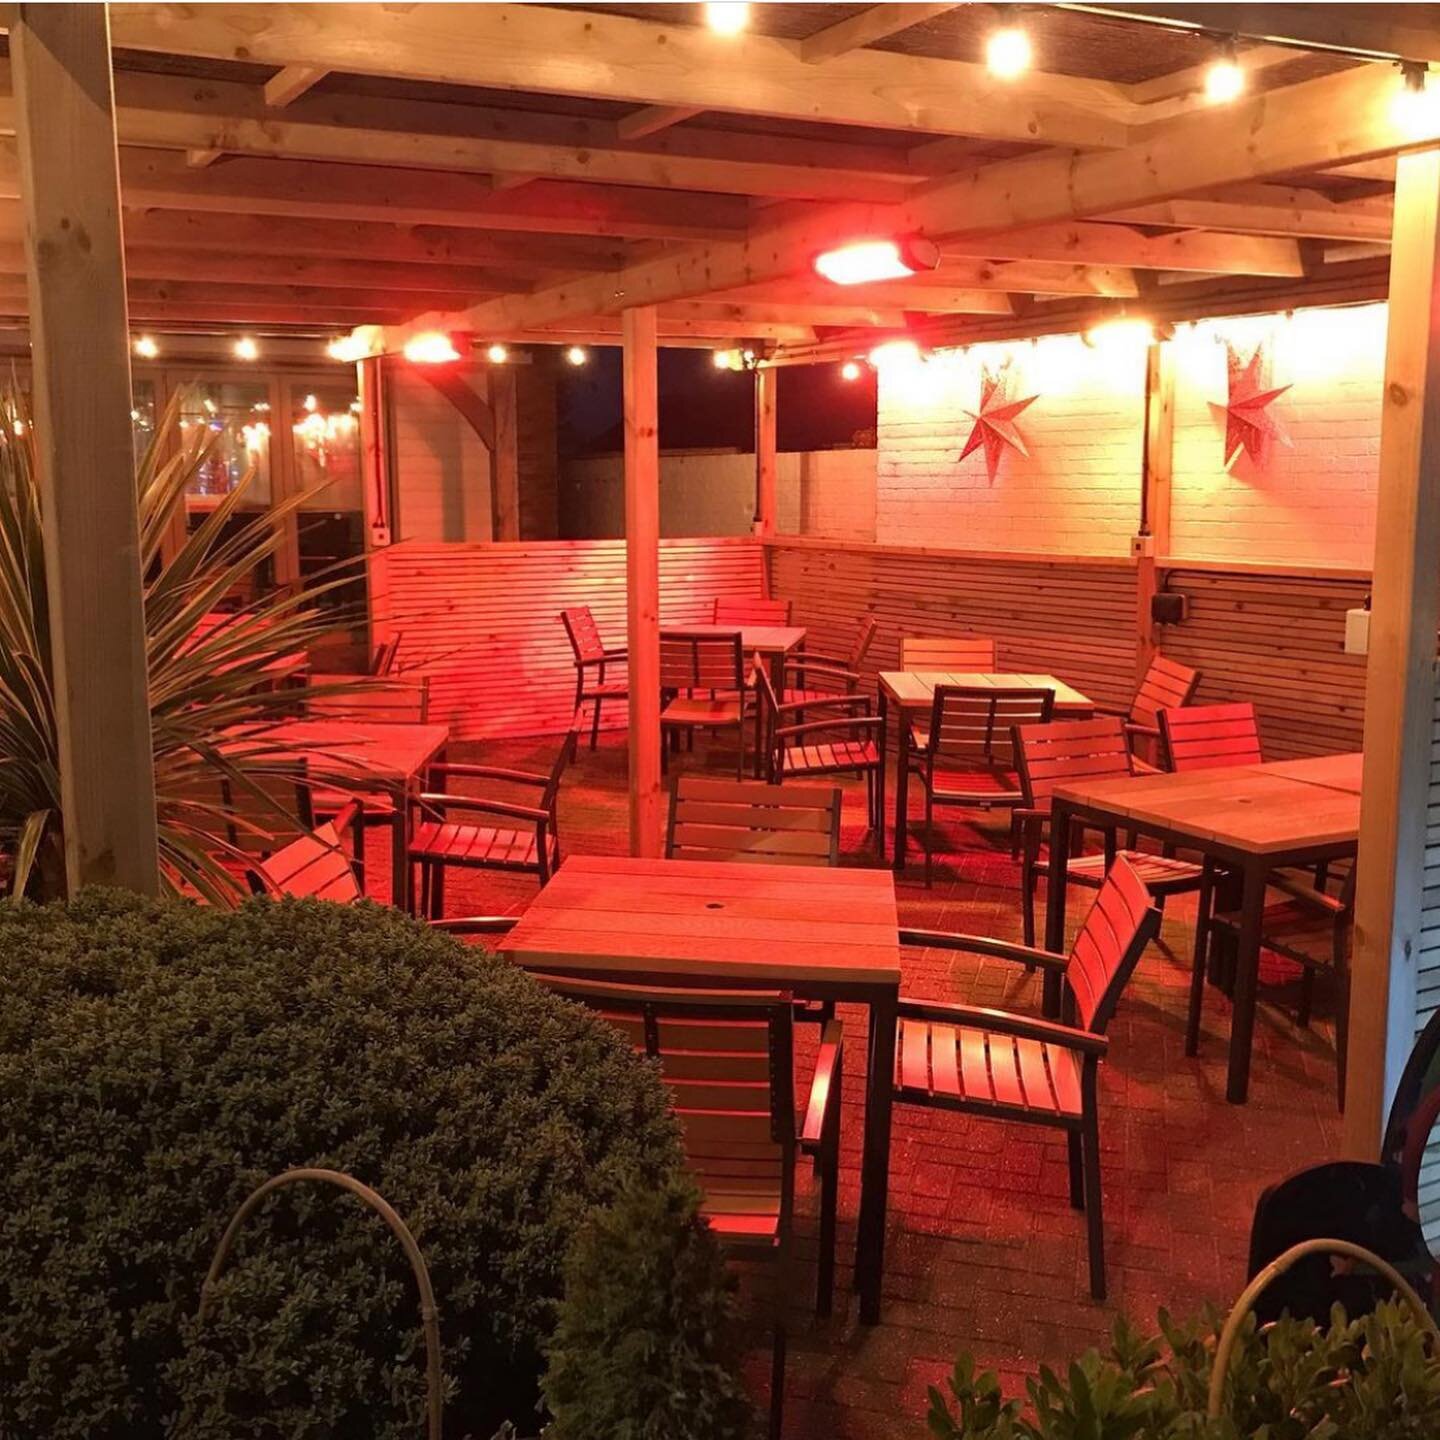 Check out the cosy beer garden canopy at The Talbot in Cuckfield where we installed heater lamps and festoon lighting to create a warm &amp; inviting area to relax. It also made it to number 3 in the best heated outdoor pub areas in Sussex! #pub #bee